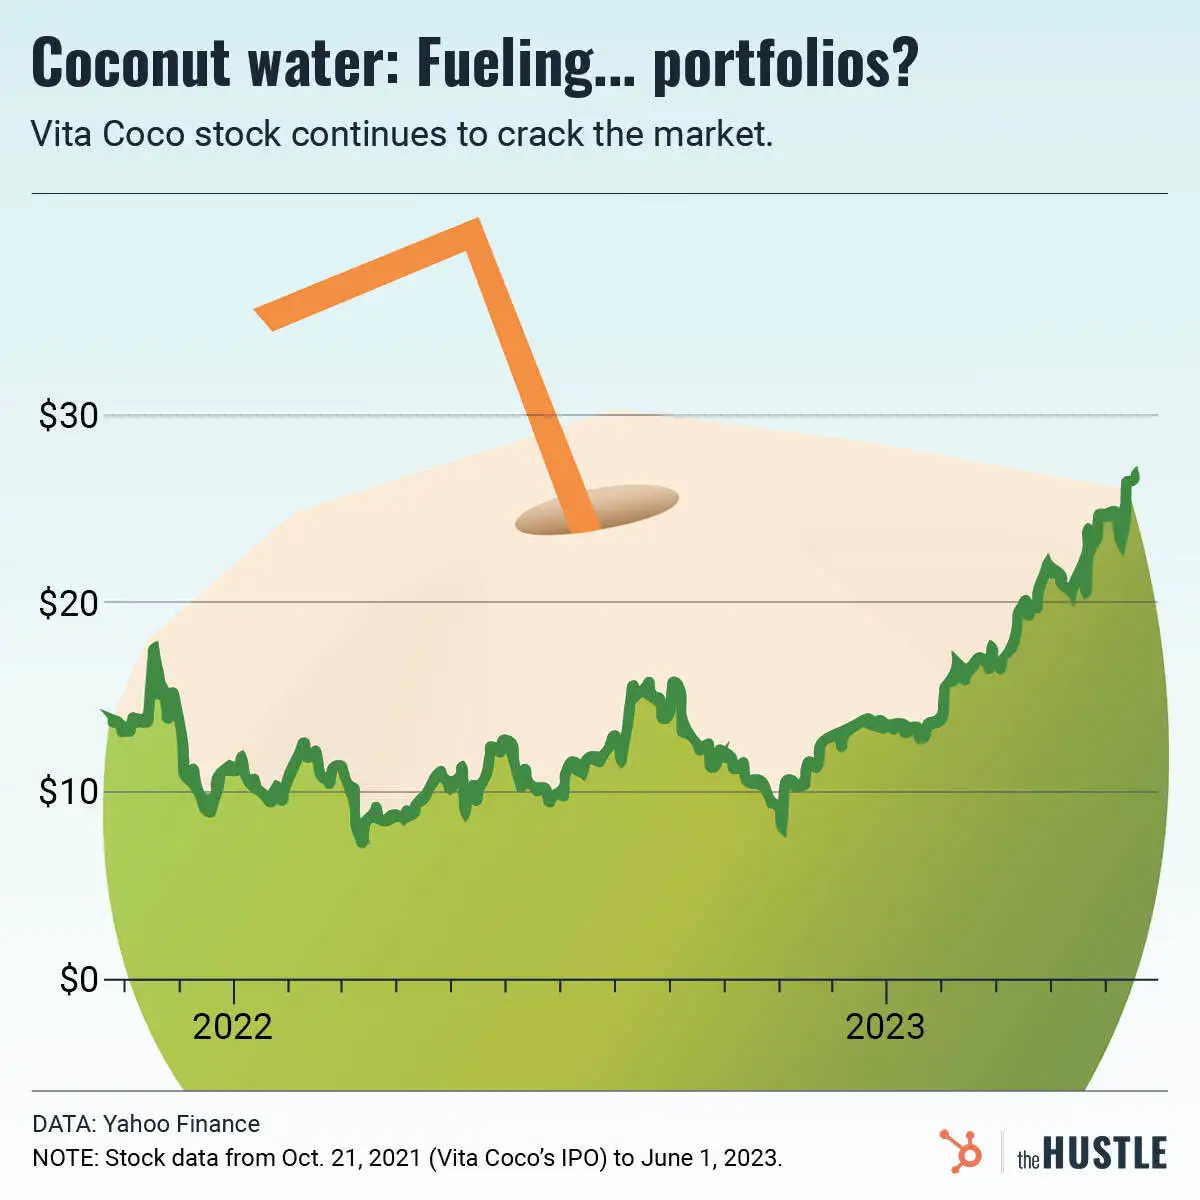 Coconut water quenching investors’ thirst for gains